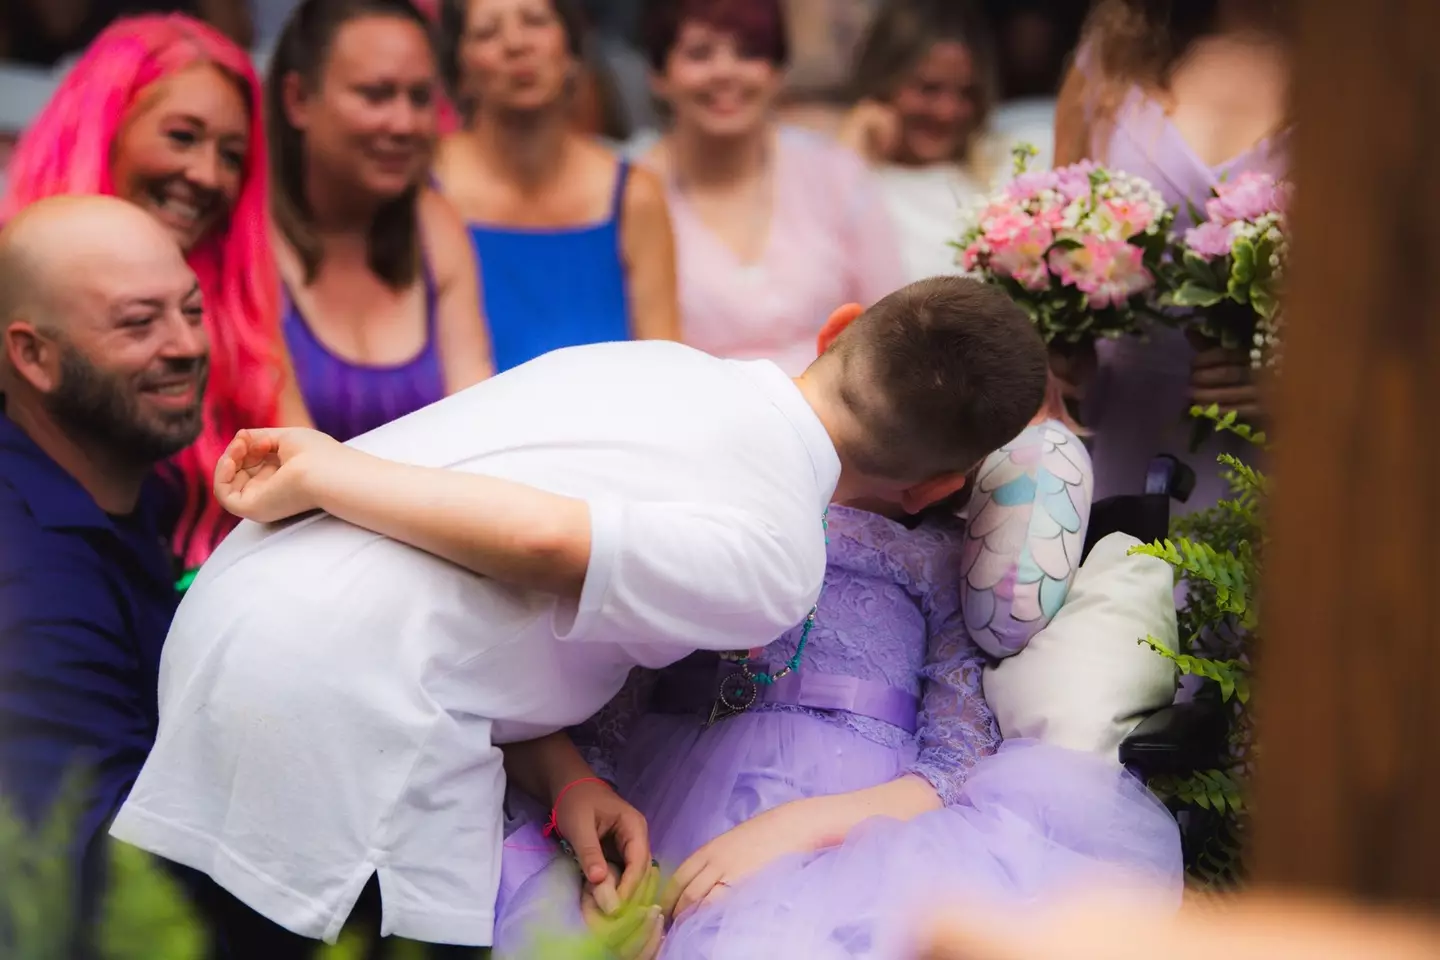 The 10-year-olds 'got hitched' in a touching ceremony.